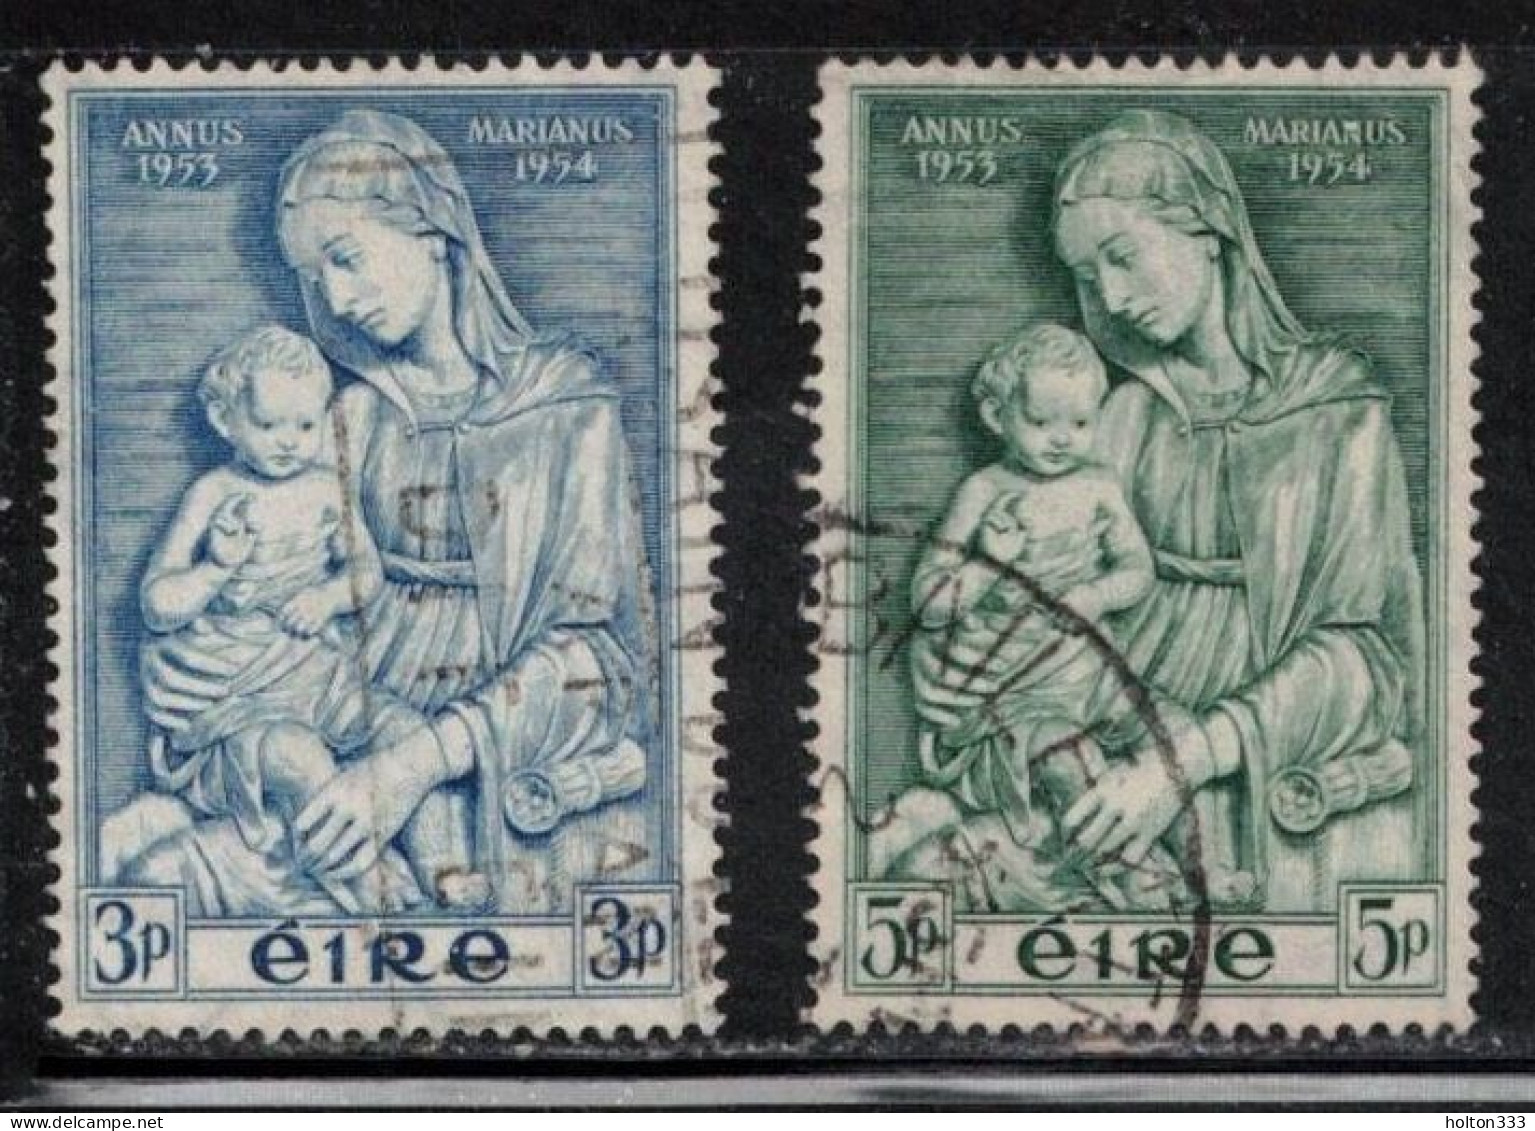 IRELAND Scott # 151-2 Used - Madonna By Della Robbia B - Used Stamps